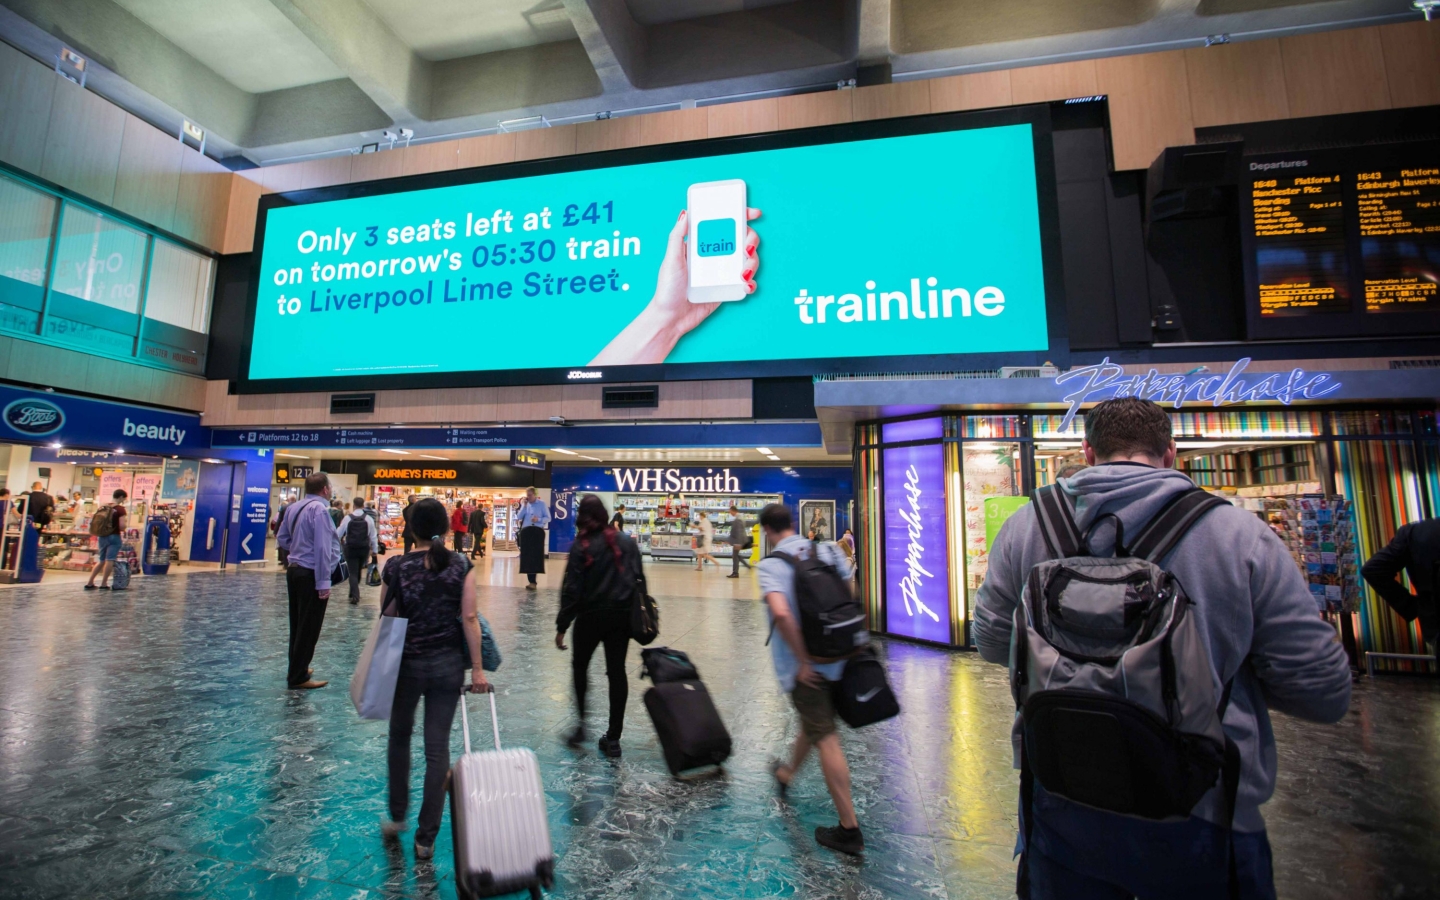 Trainline live ticket prices and availability, Dynamic campaign, Euston Station, JCDecaux UK